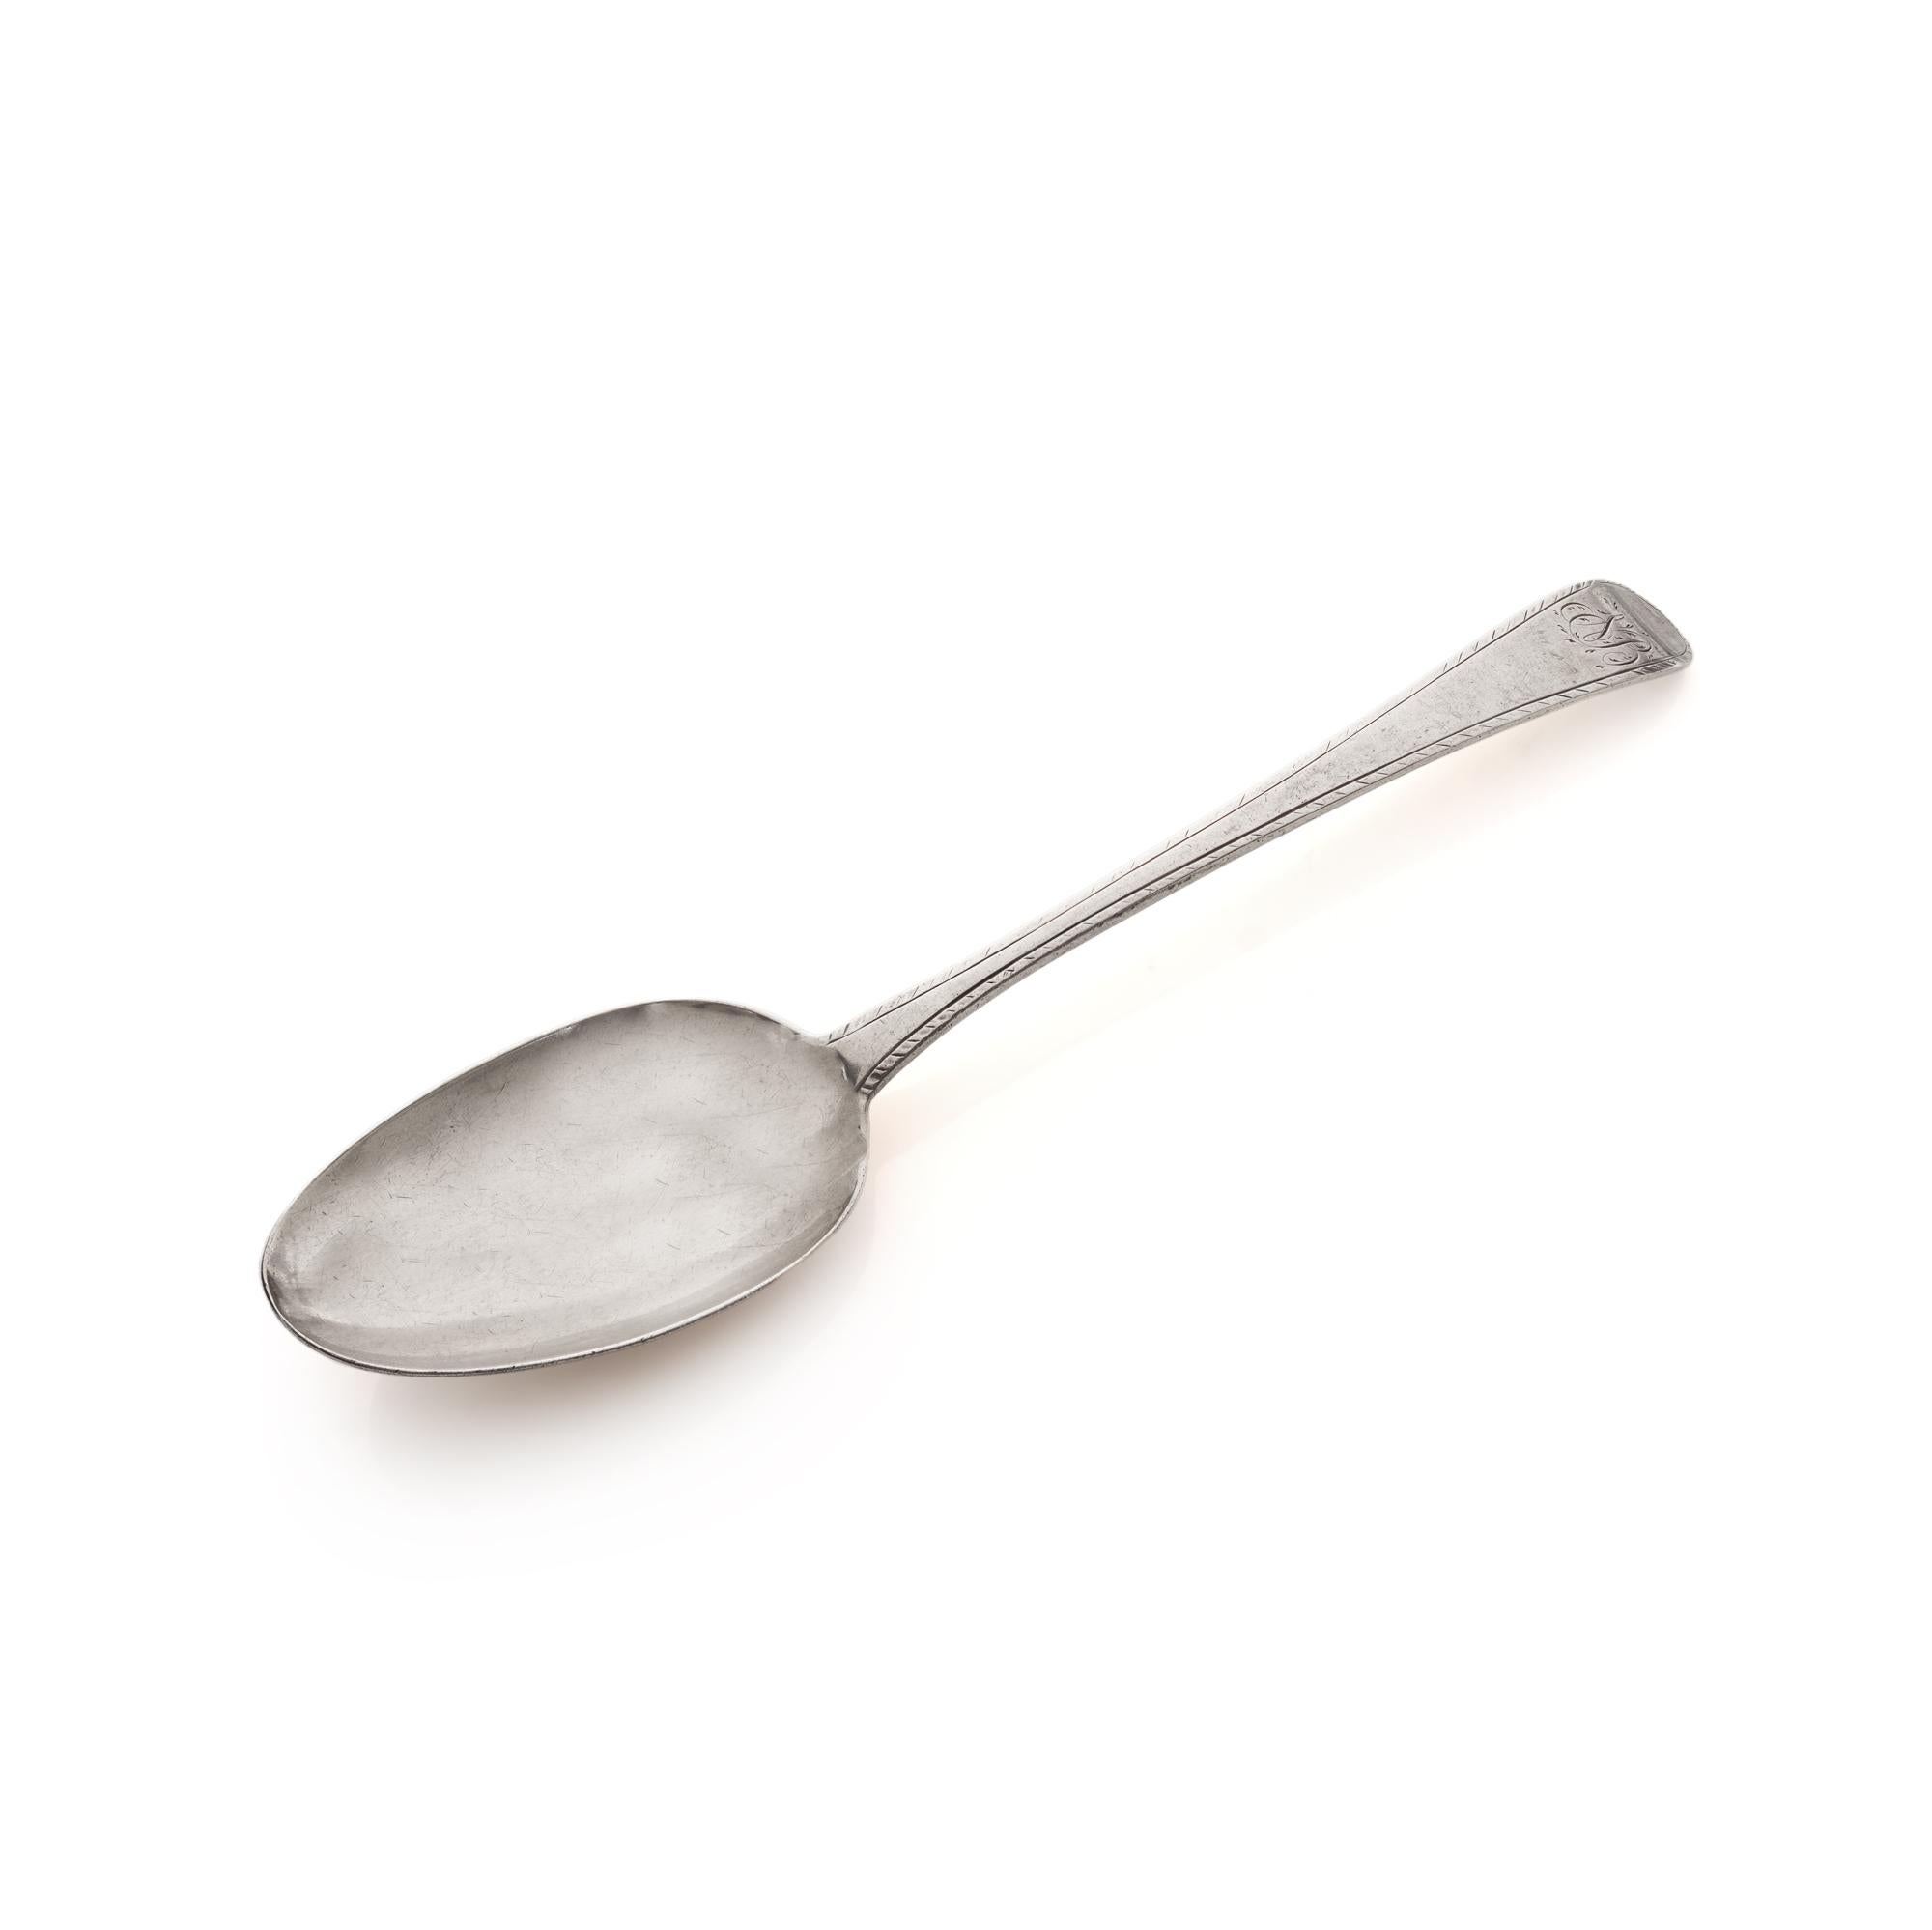 Antique Georgian sterling 925 silver large spoon by Hester Bateman. 
The spoon has a monogram ' SB ' 
Maker: Hester Bateman 
Made in England, 1782 

The measurements:
Length x width x depth: 22.5 x 4.5 x 2.9 cm 
Weight:82 grams 

Condition: Spoon is